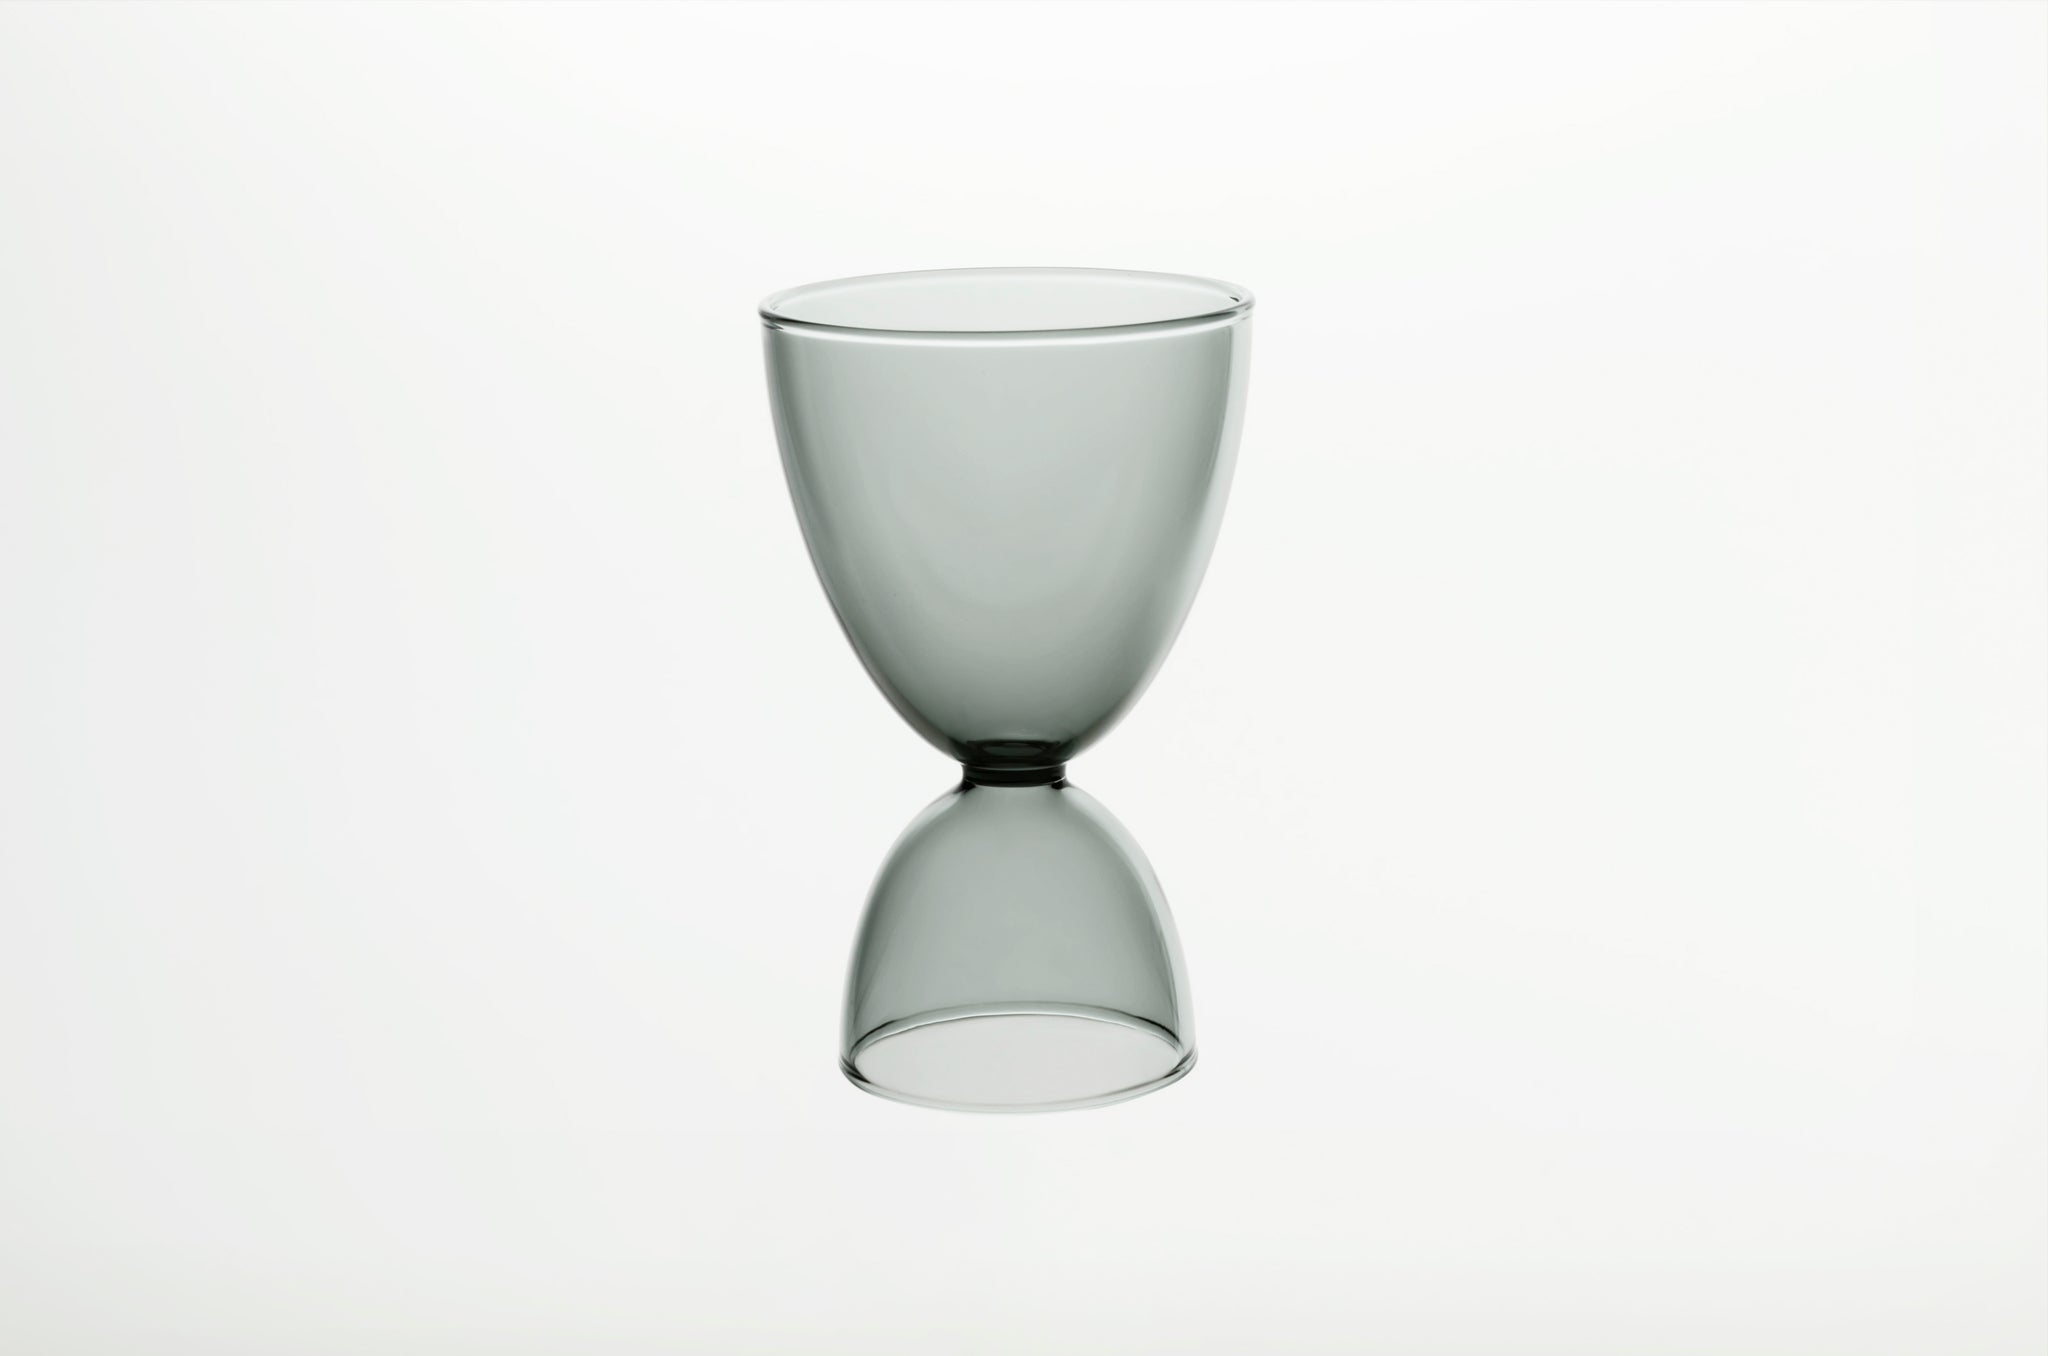 Pair of Colorful Hourglass Cocktail Glasses, Monotone Smoke